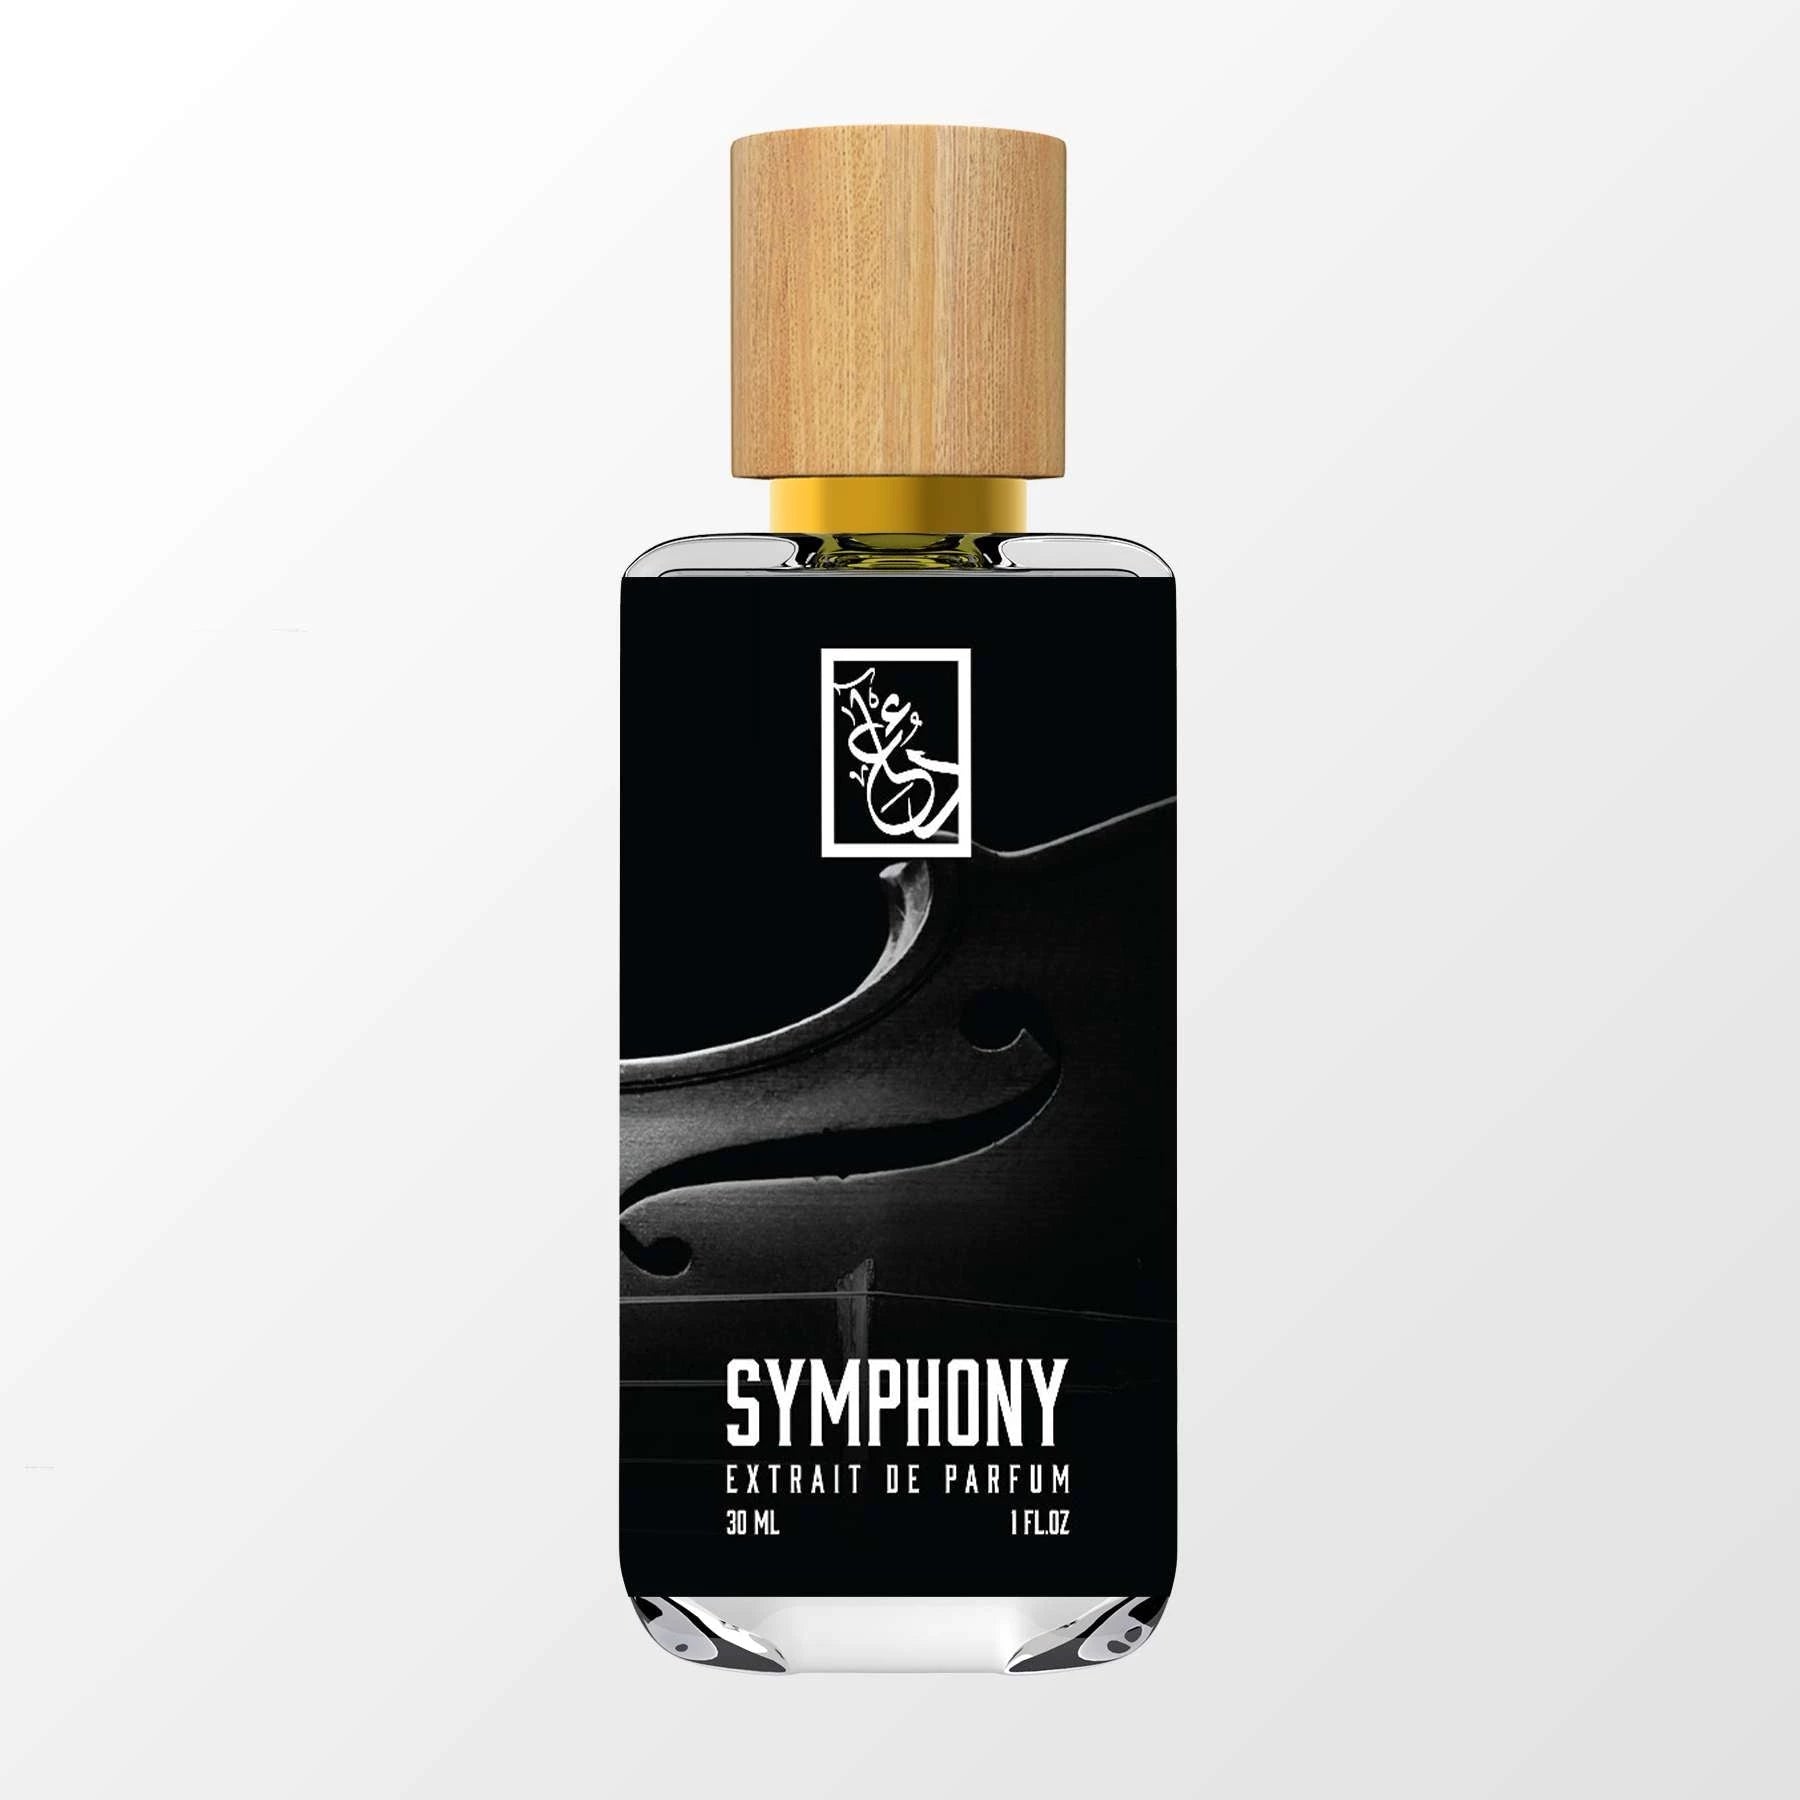 Highly recommend the new scent Symphony. I picked up up yesterday